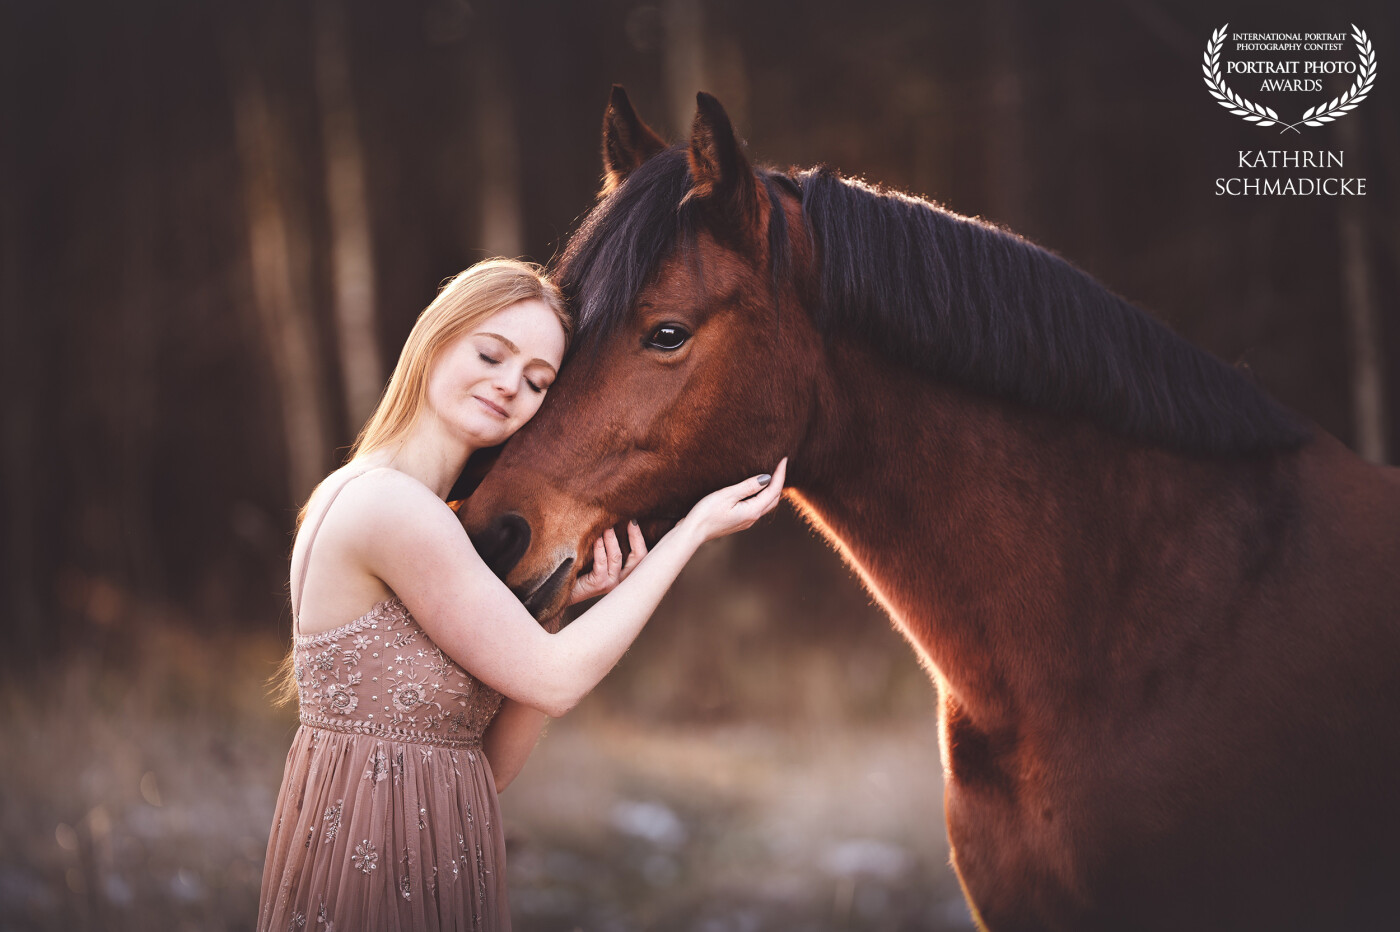 Create moments, freeze memories! Pictures should tell stories and give the customer a feeling of happiness, exactly this unique moment of this beautiful intimate relationship between horse and human